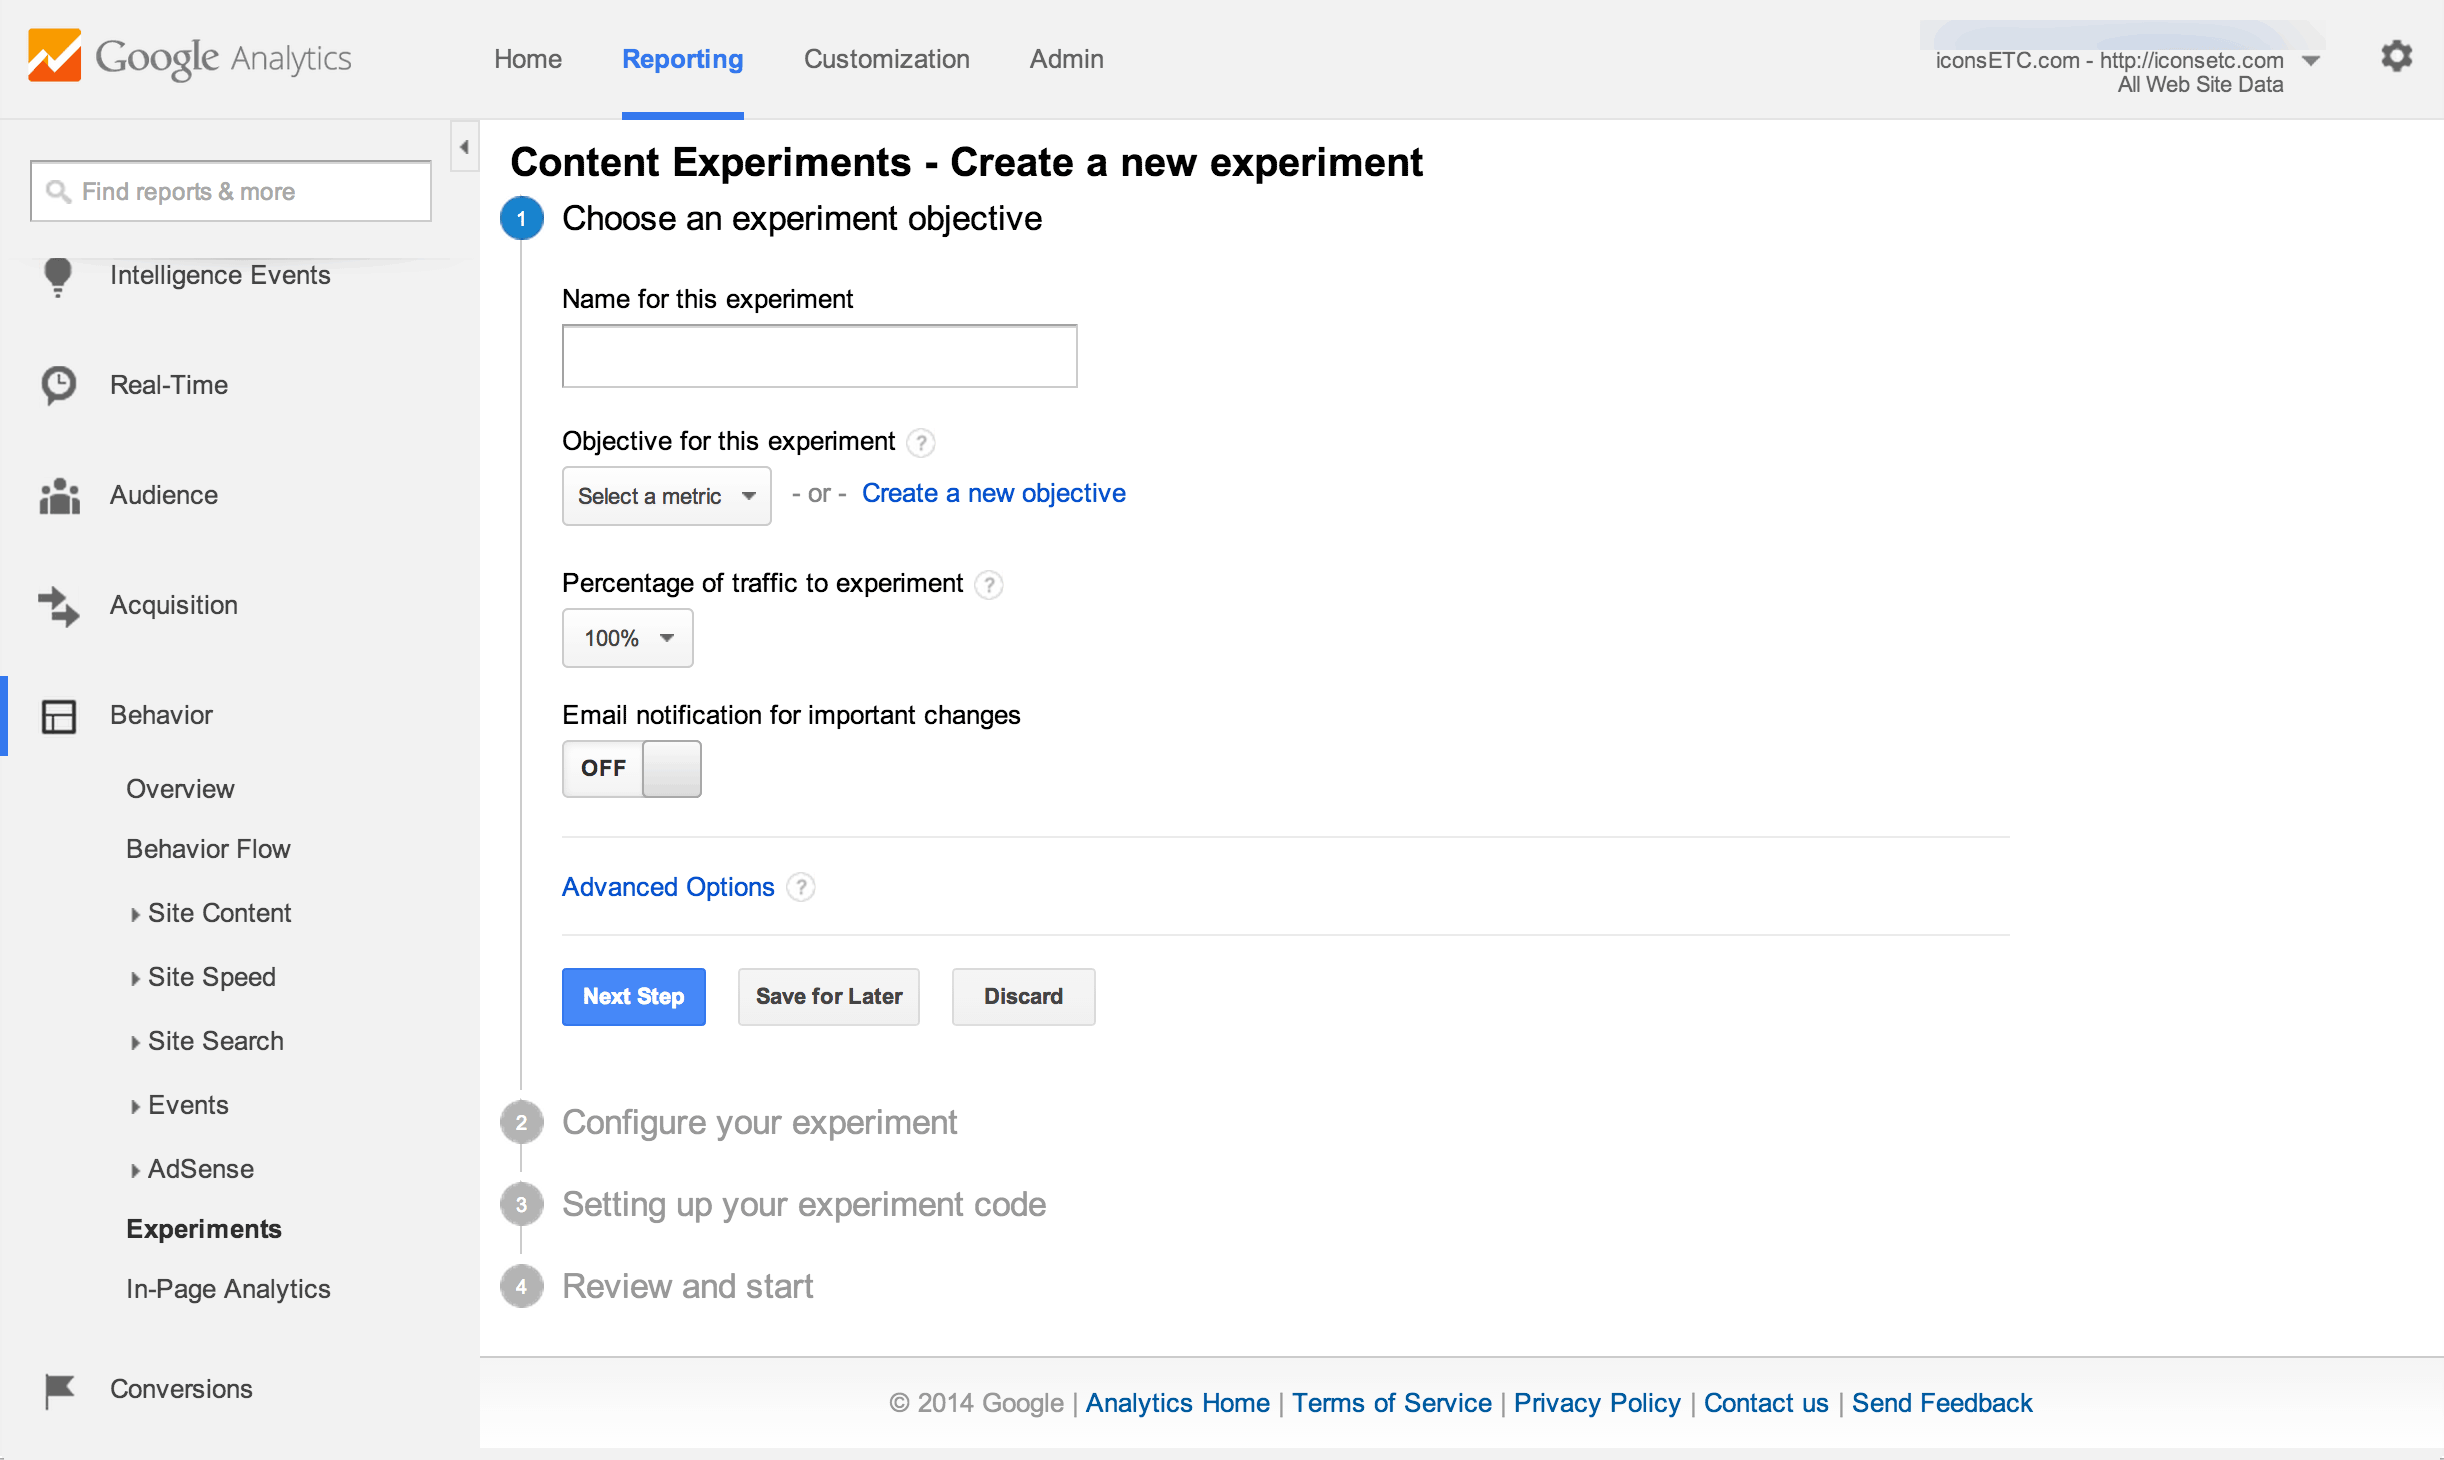 Content Experiments in Google Analytics